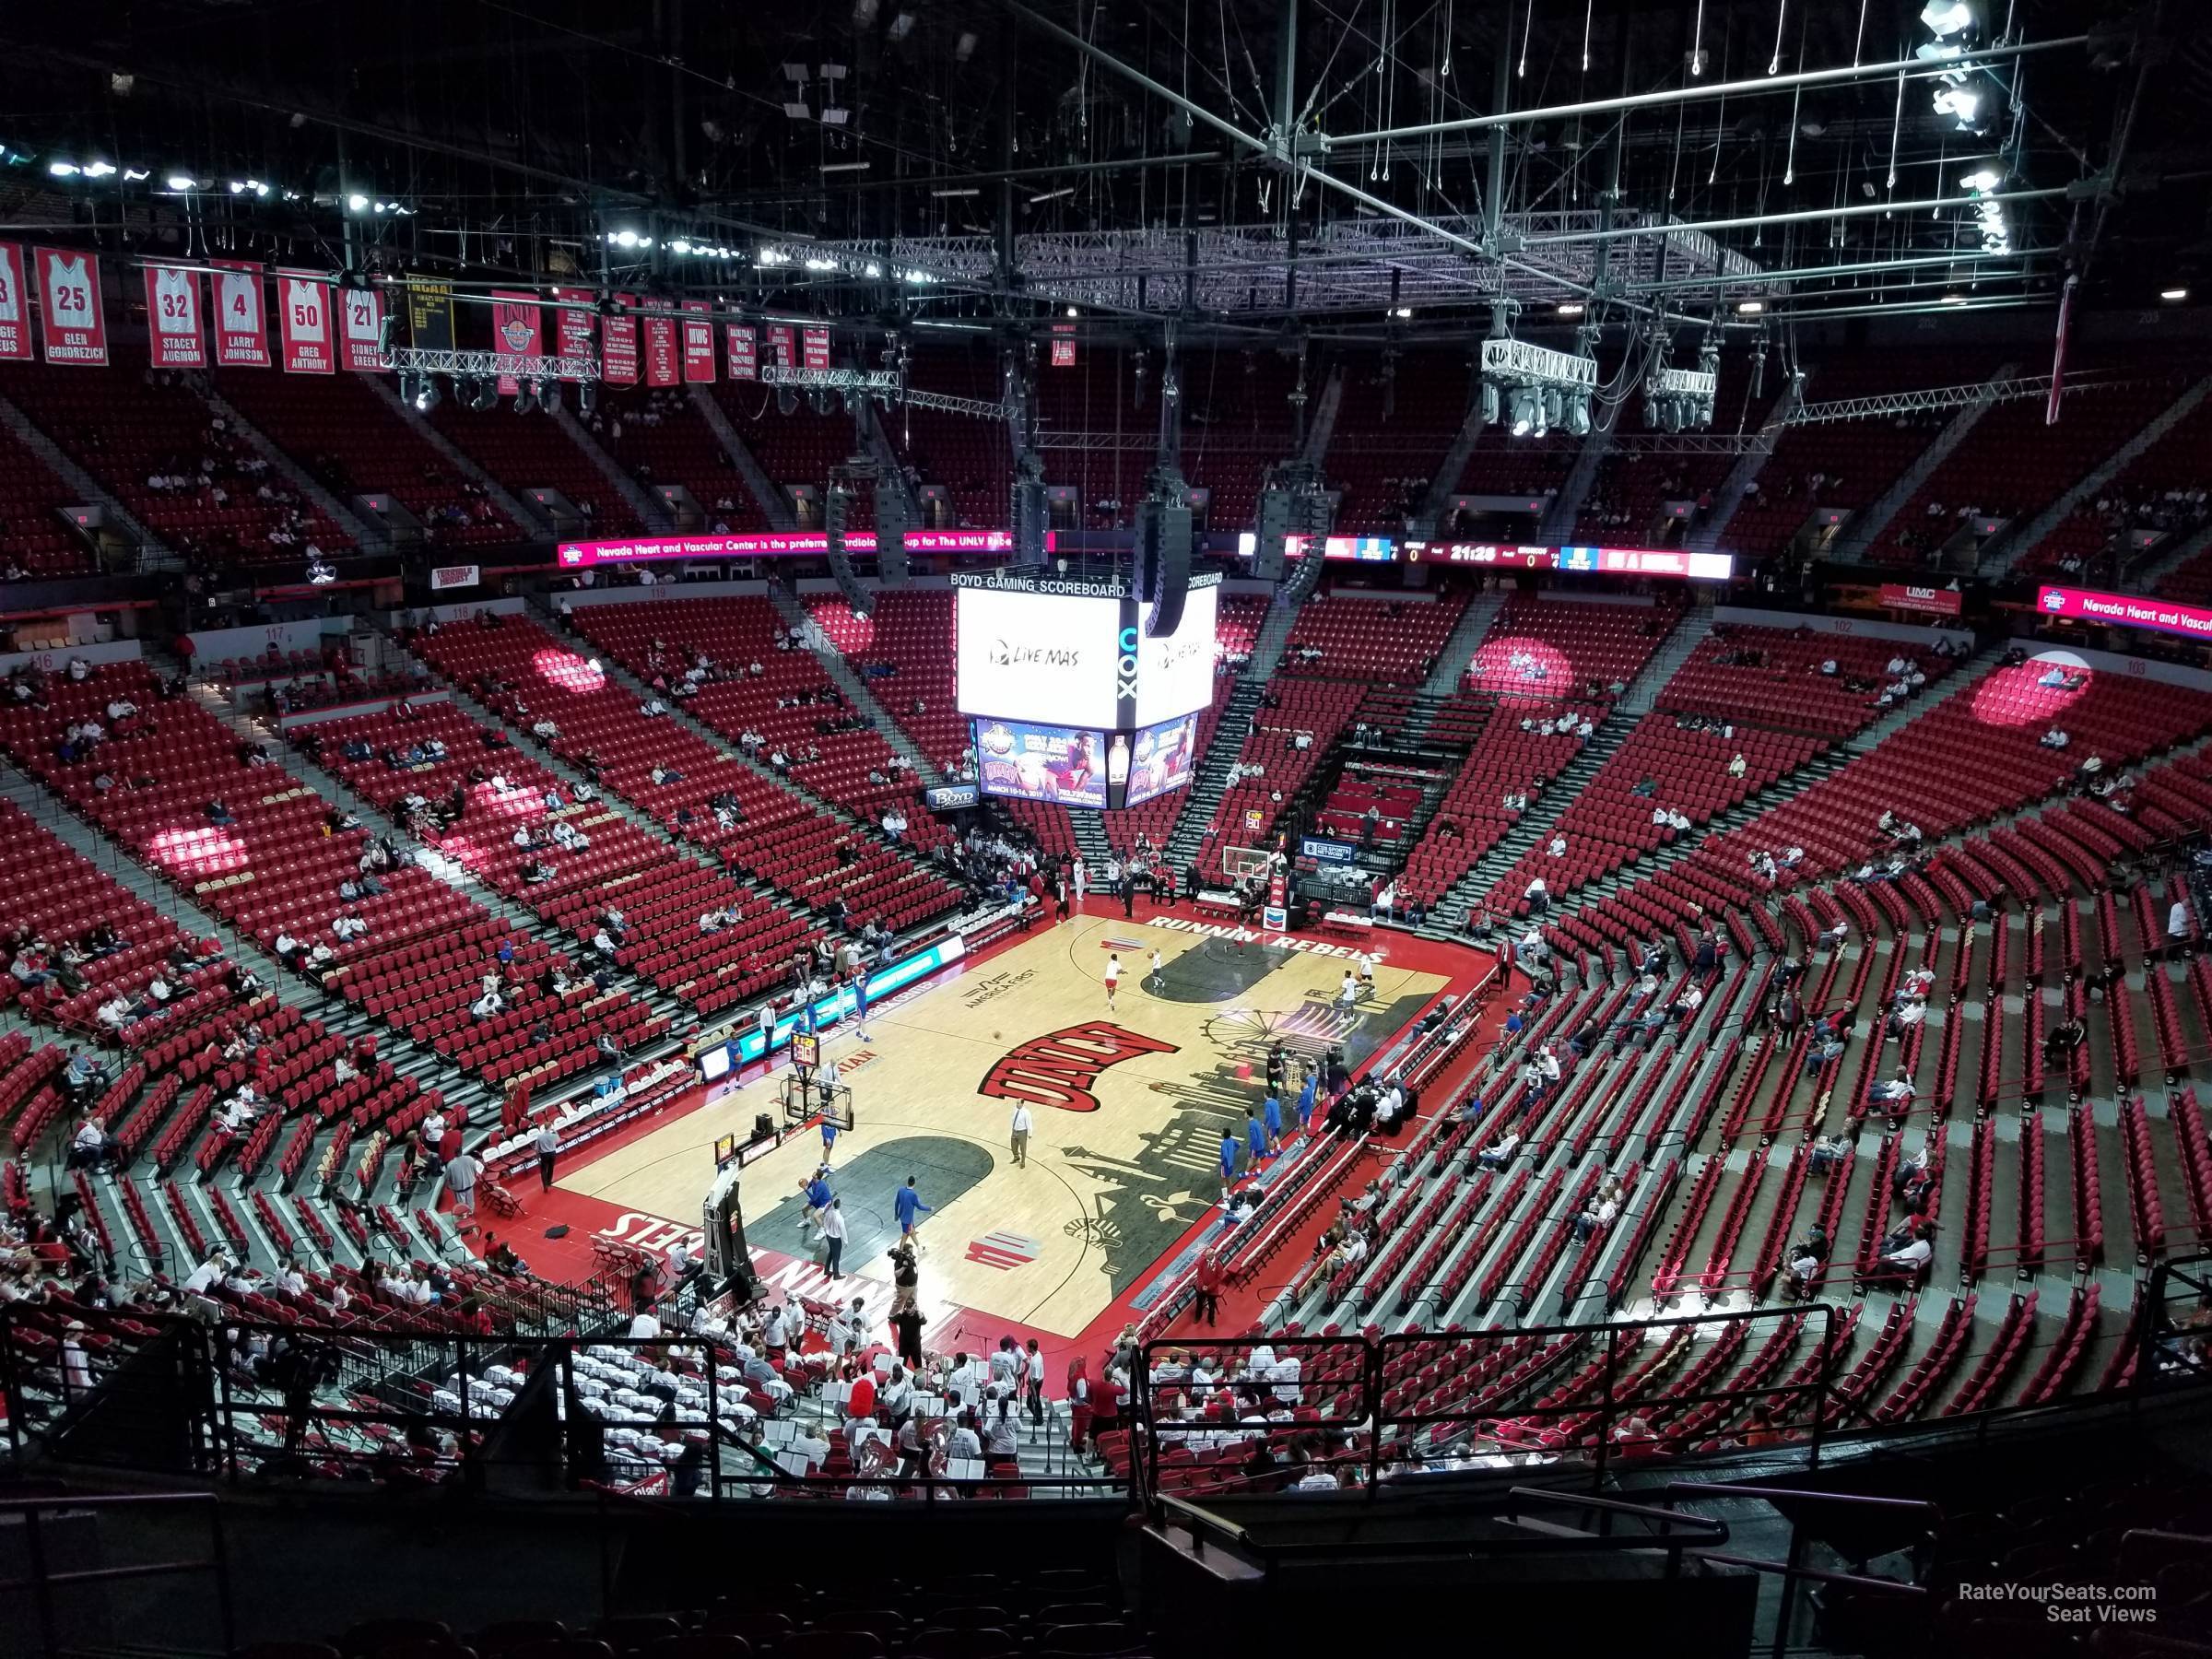 section 215, row l seat view  - thomas and mack center